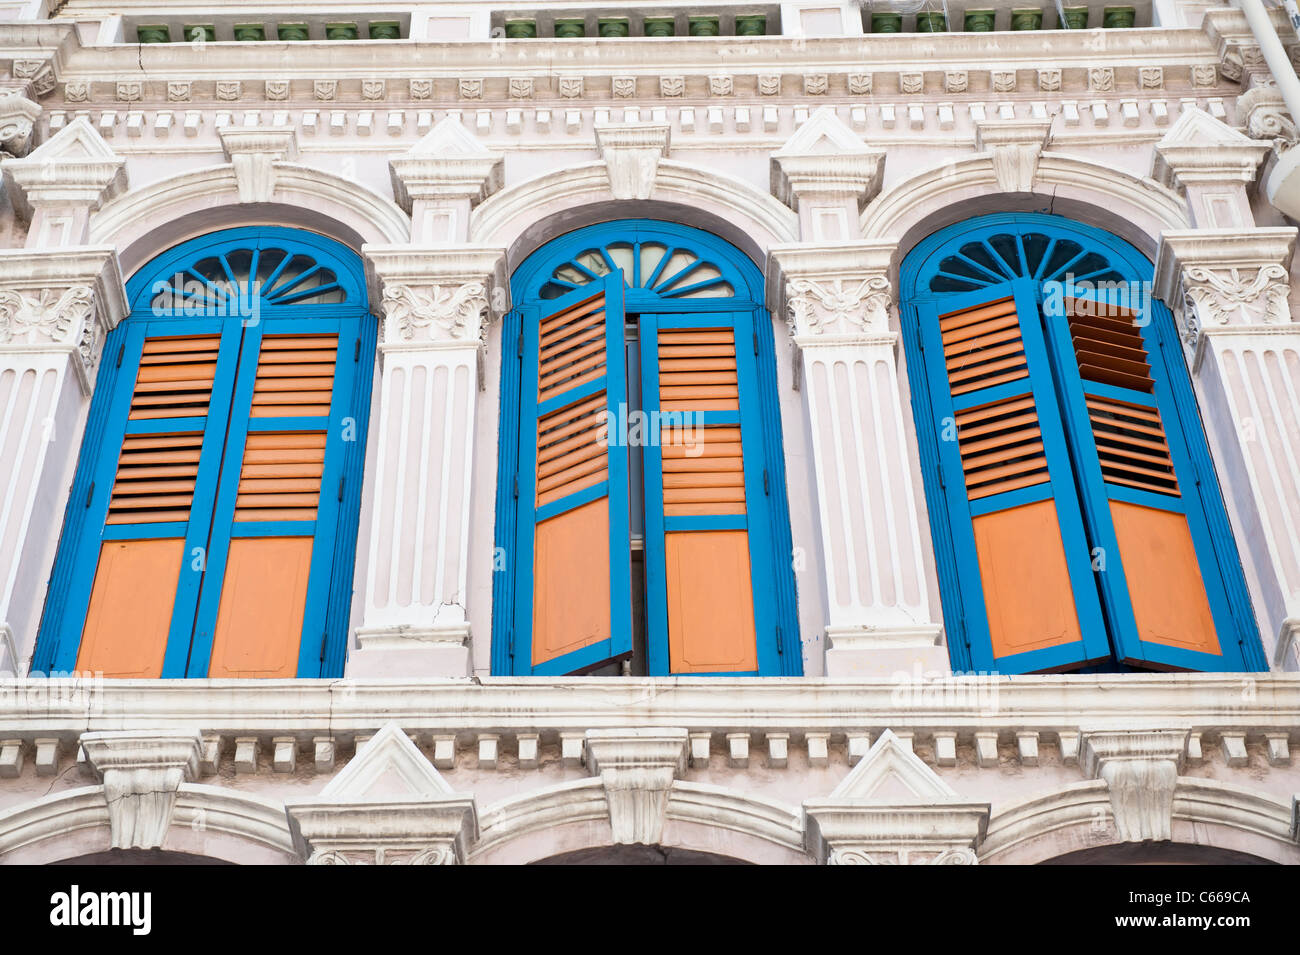 Colorful Shophouse in Chinatown, Singapore Stock Photo